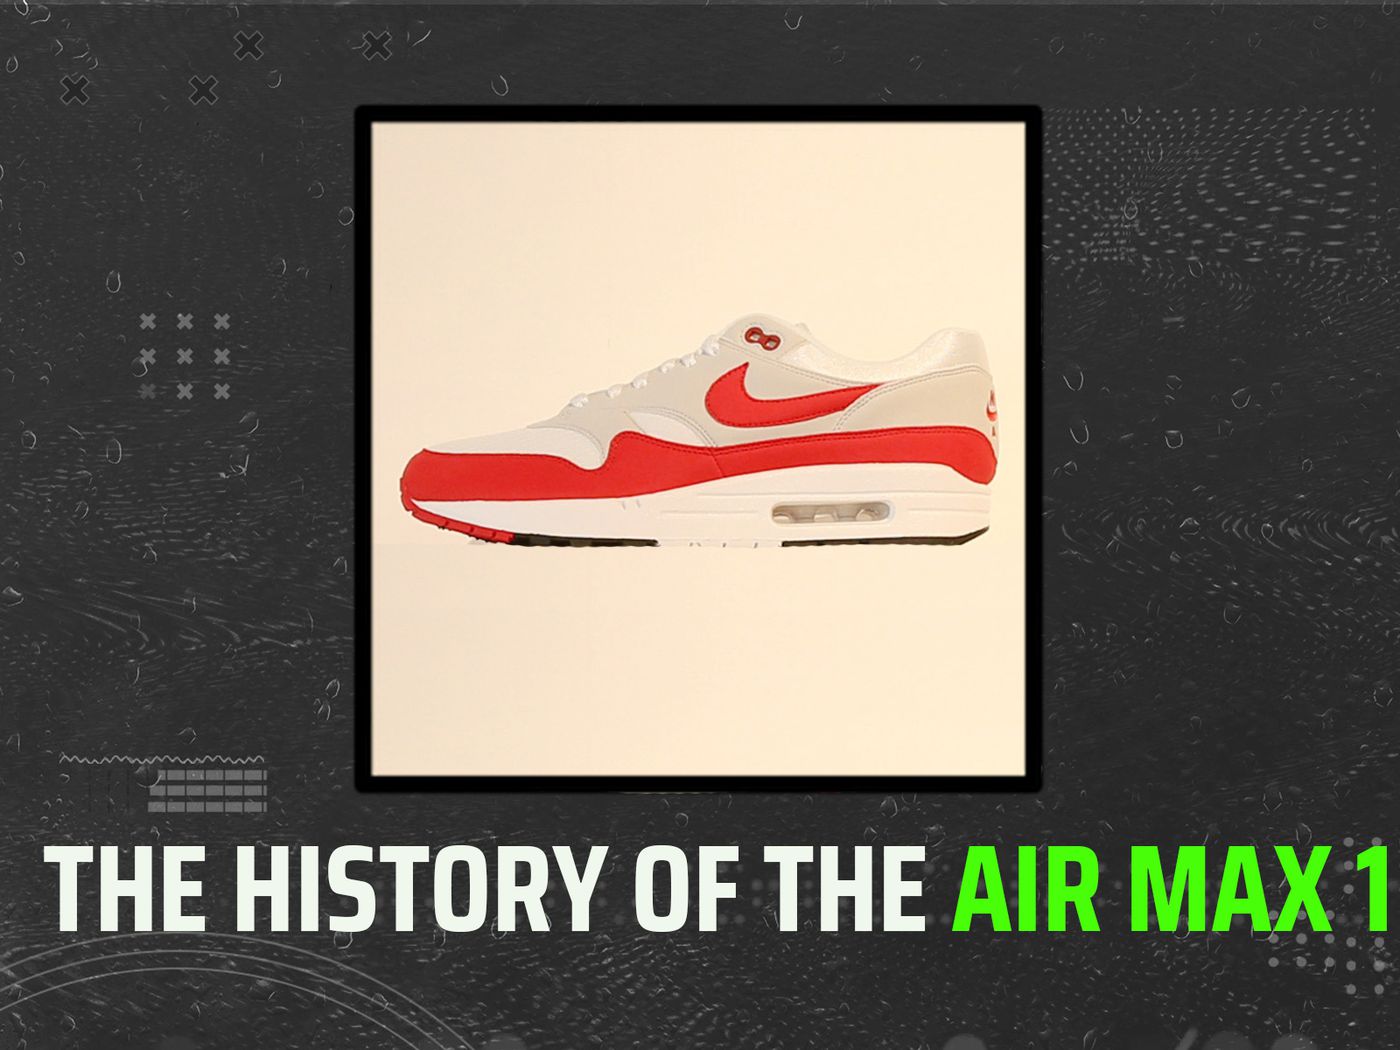 Inmunidad surco para castigar Nike Air Max Day 2022: History of sneaker classic, new shoe releases -  DraftKings Network